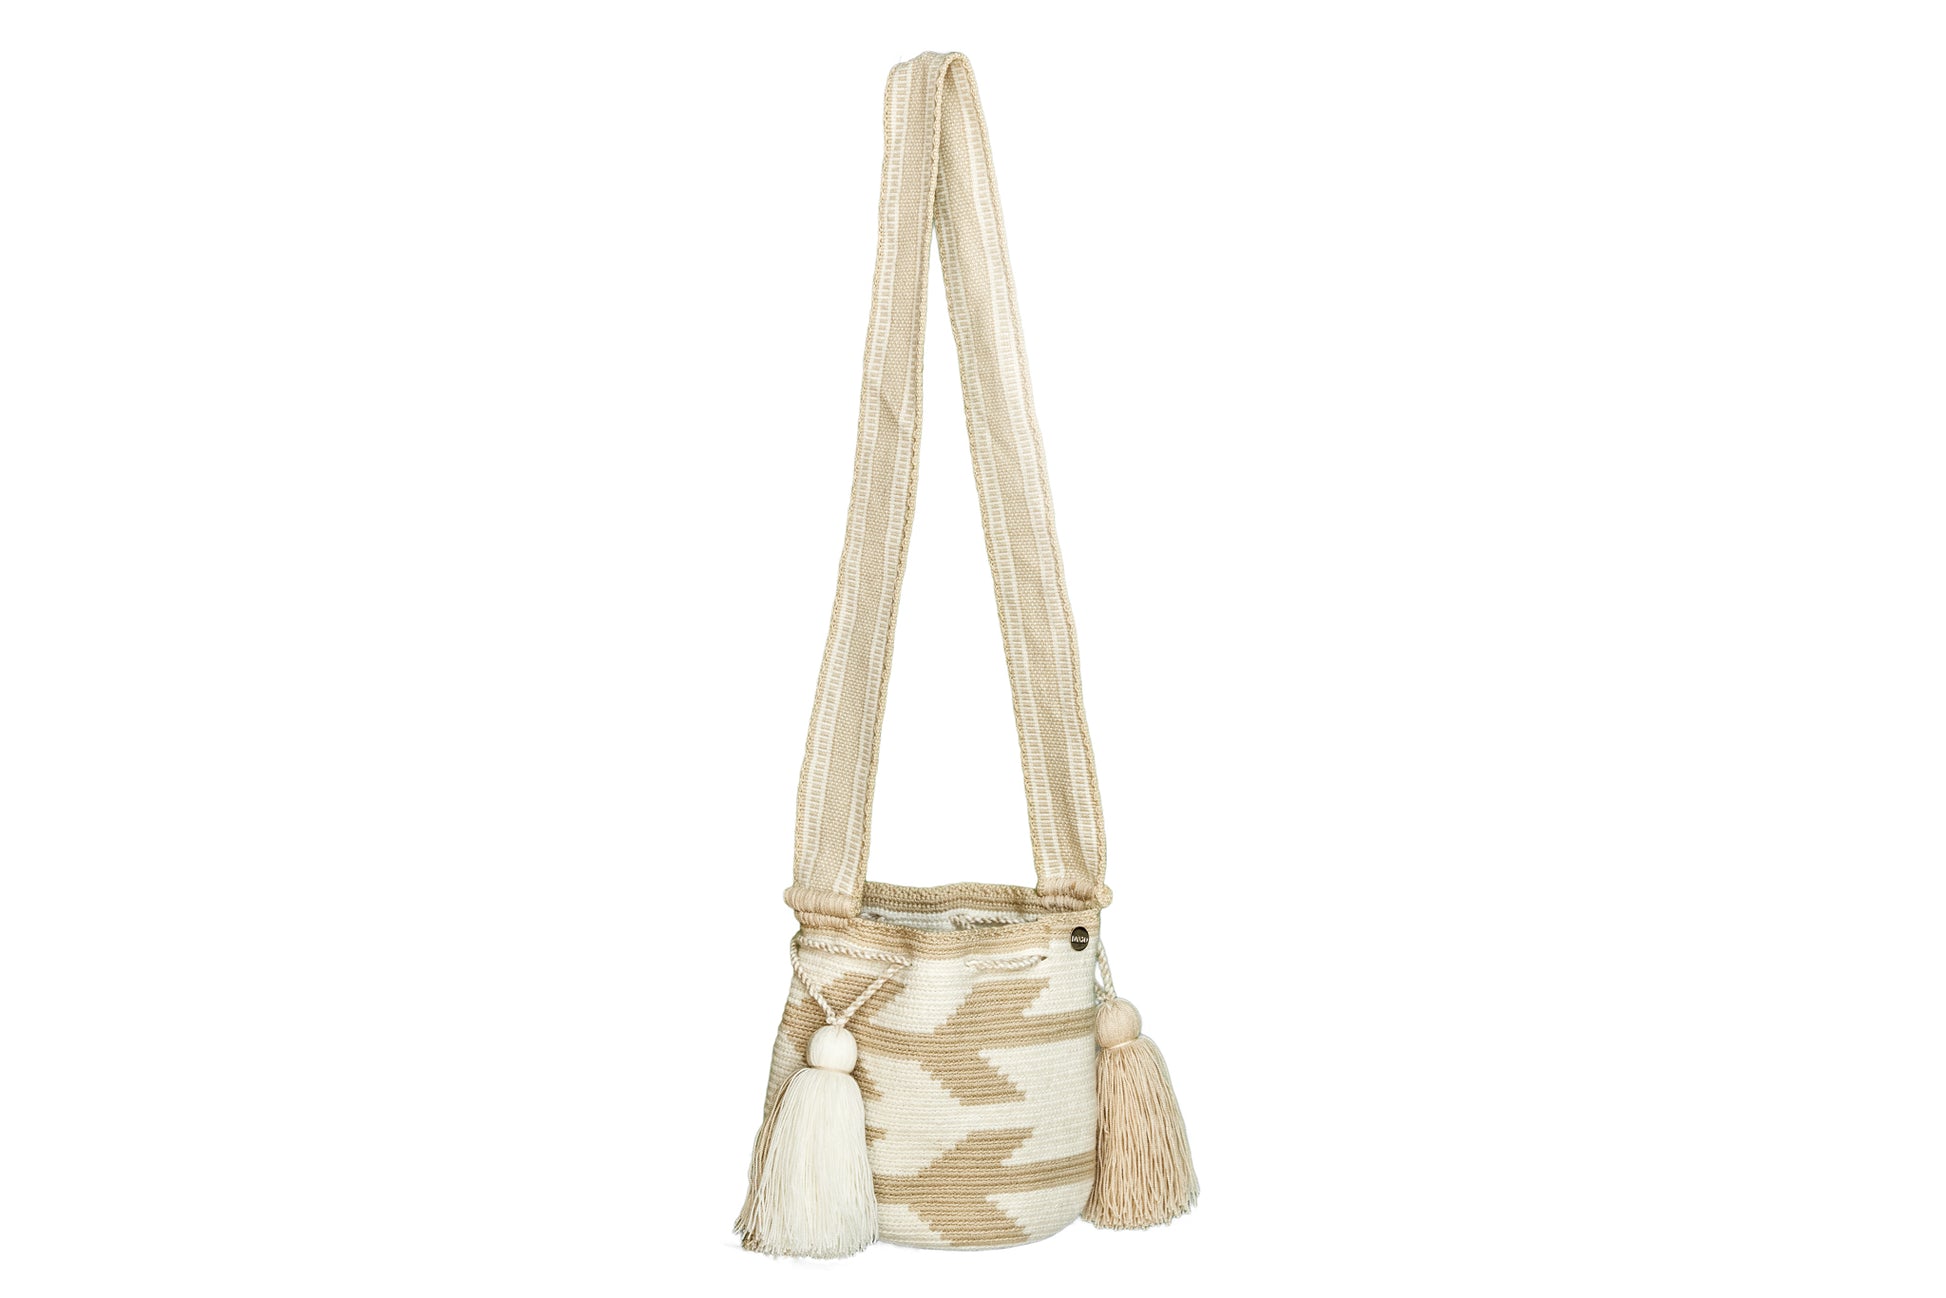 Medium White and Beige Handbag with Arrow Pattern and two tassels